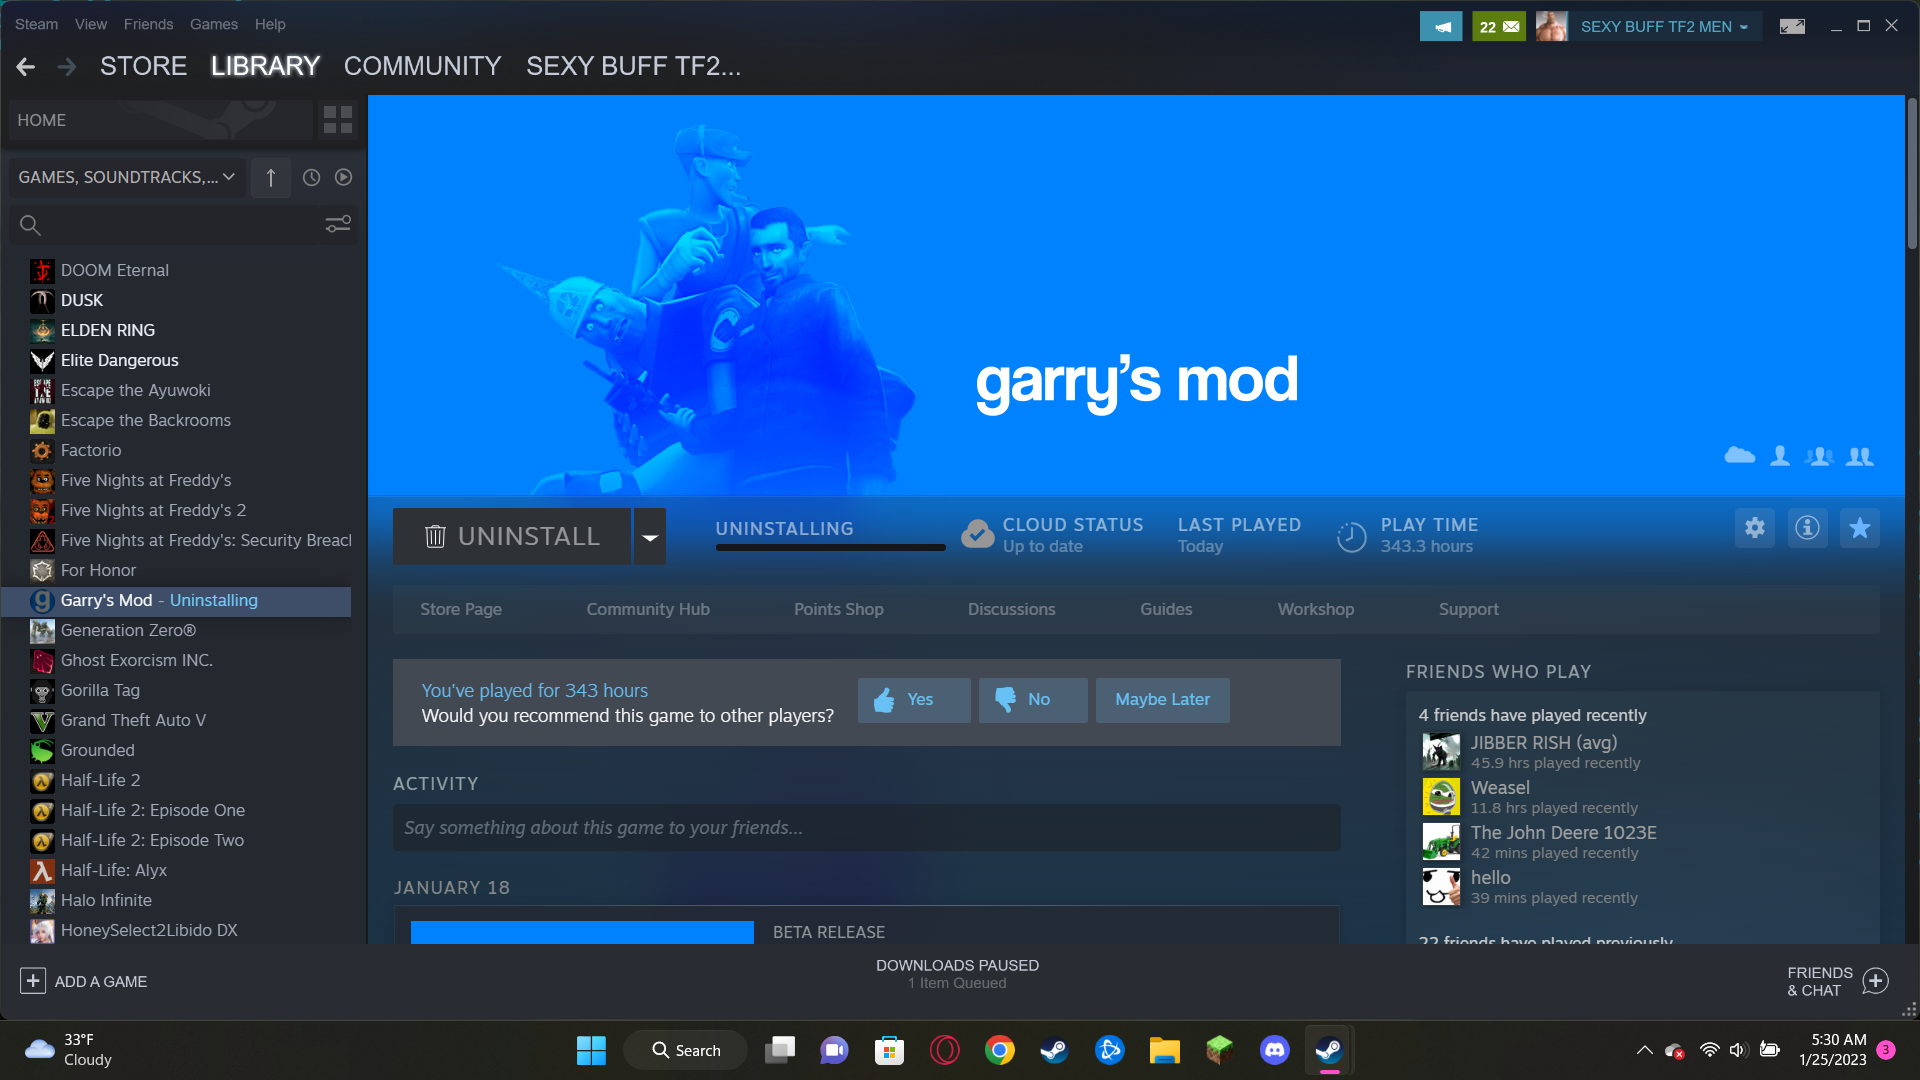 Close Garry's Mod and exit Steam completely.
Restart Steam and try downloading the update again.